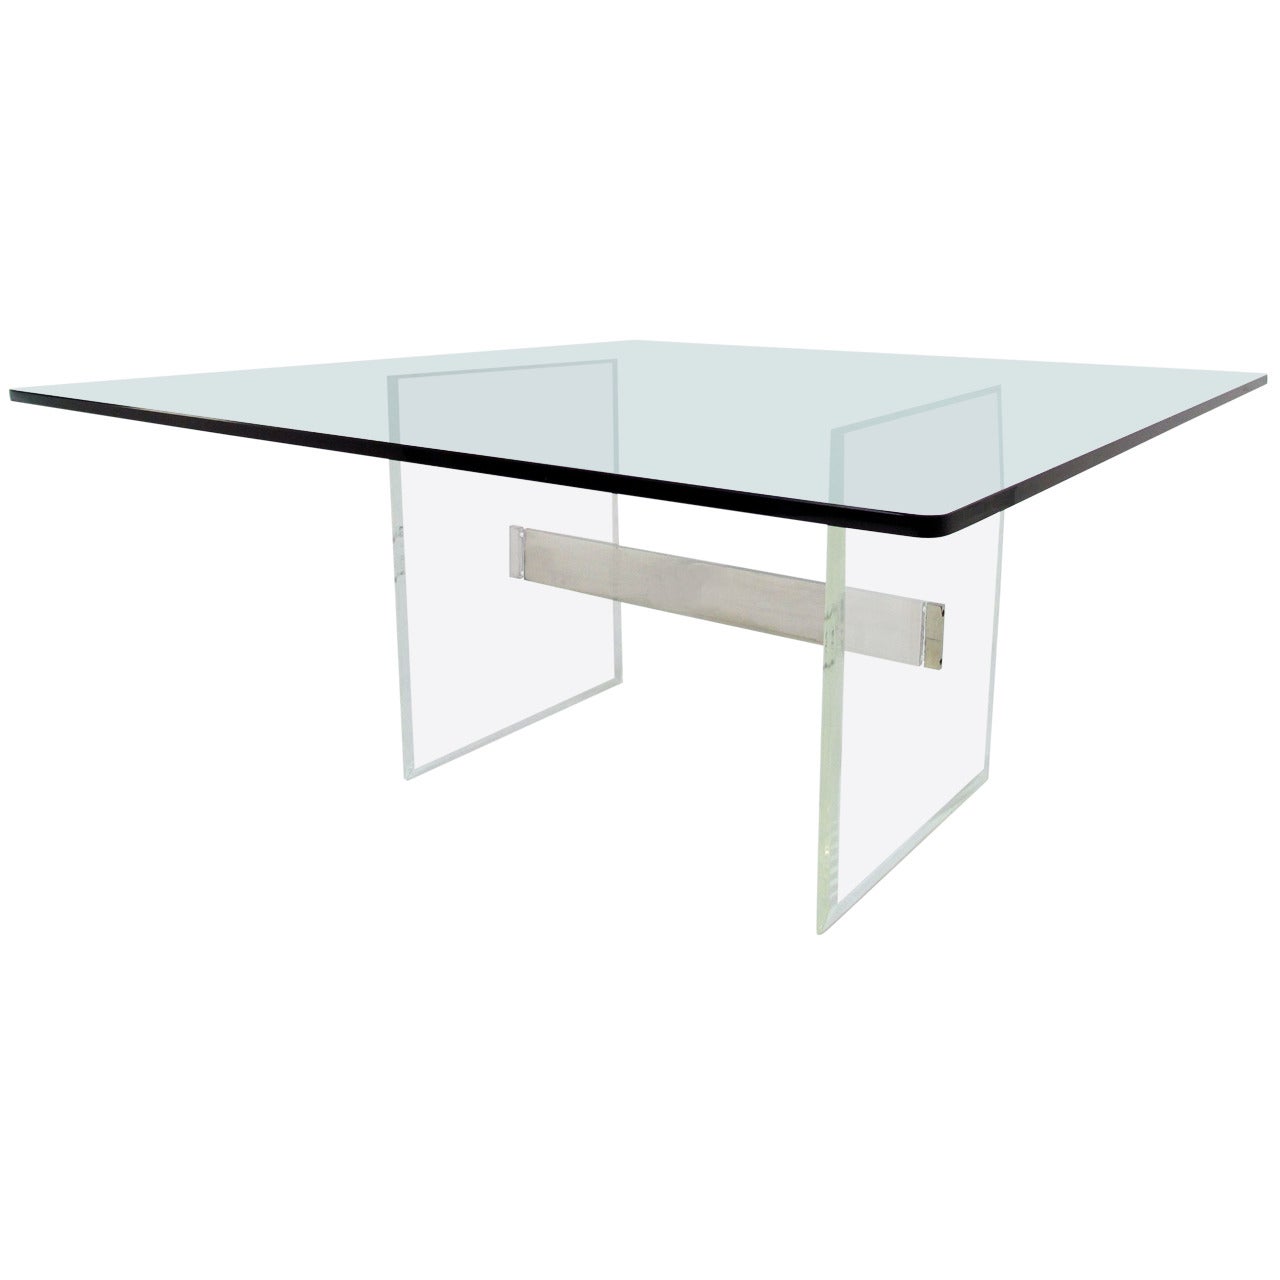 Lucite and Aluminum I-Beam Dining Table with Square Glass Top, circa 1970s